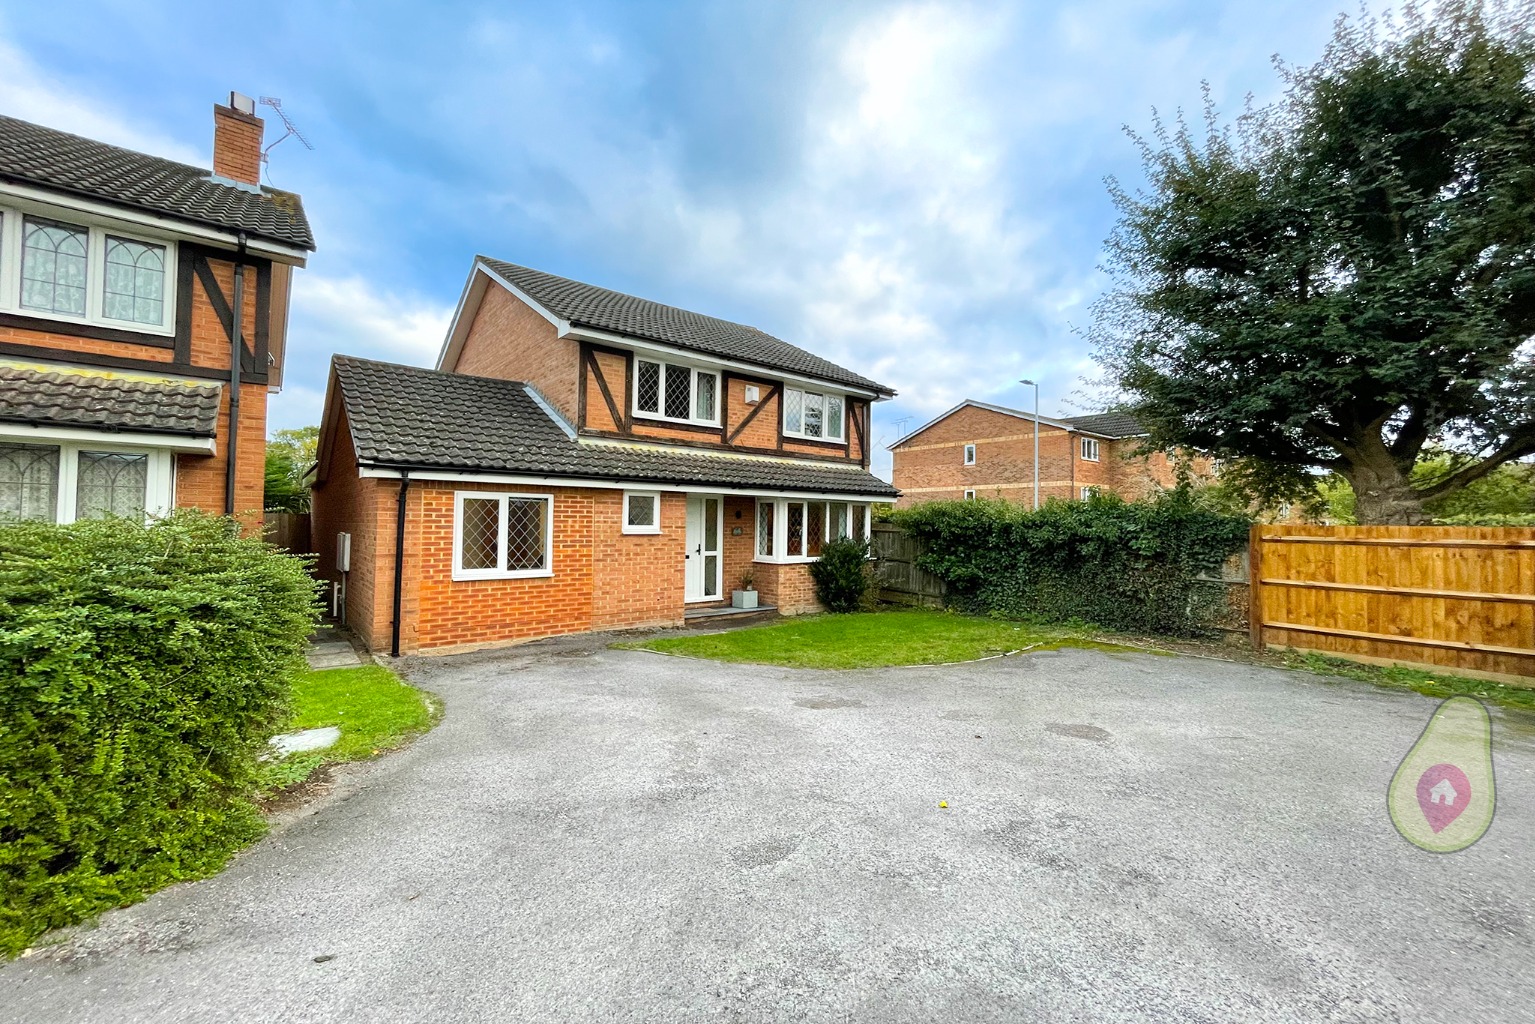 4 bed detached house for sale in Farley Copse, Bracknell, RG42